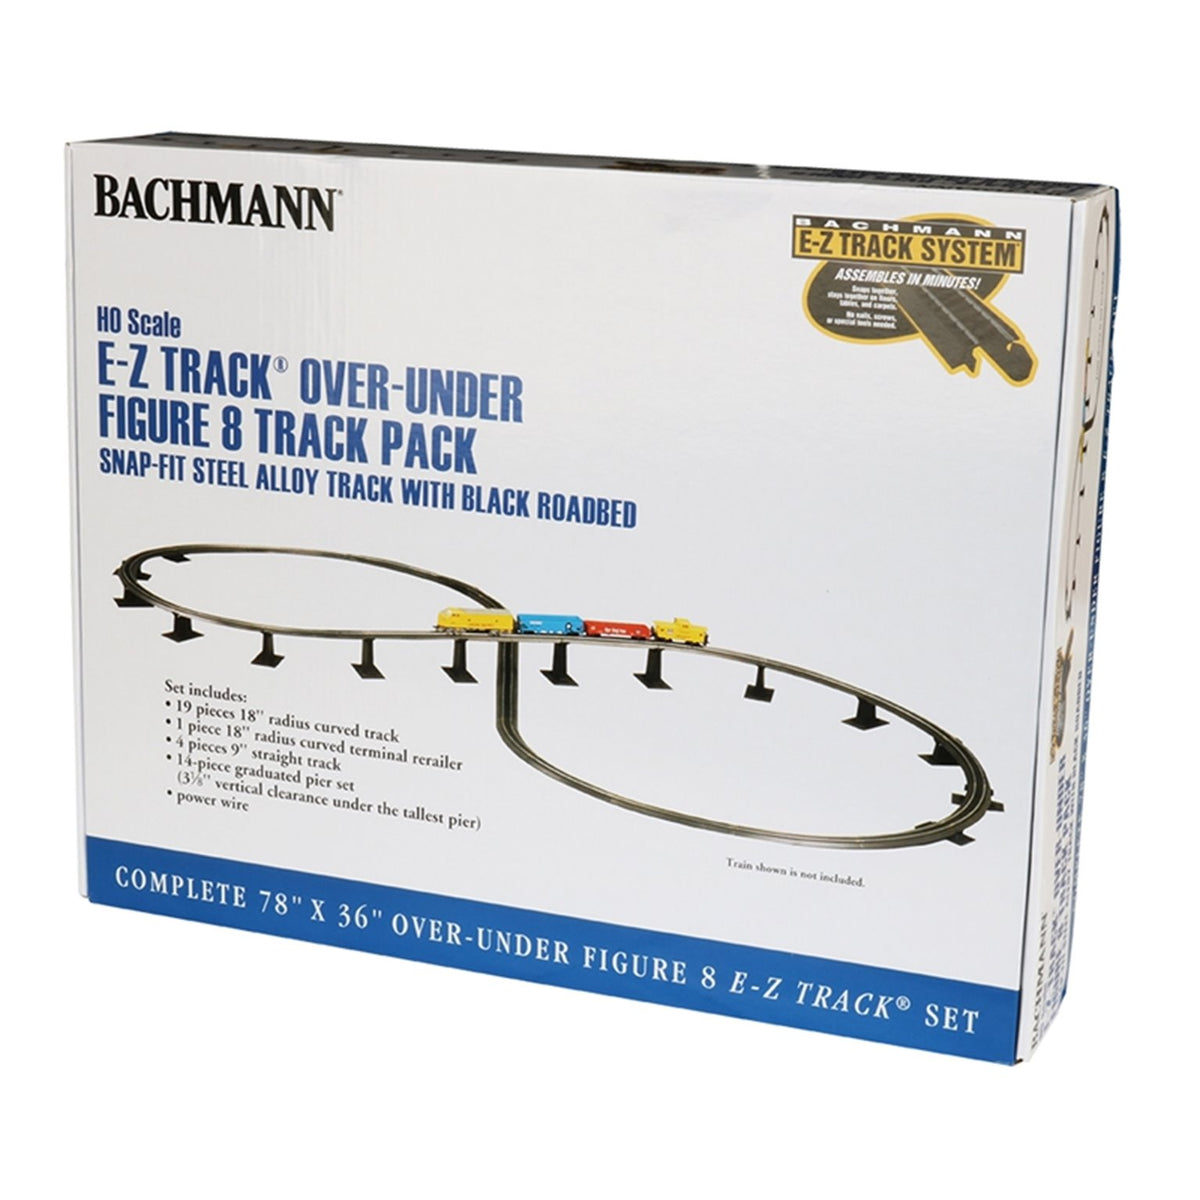 Bachmann 44475 E-Z Track Over-Under Figure 8 Track Pack